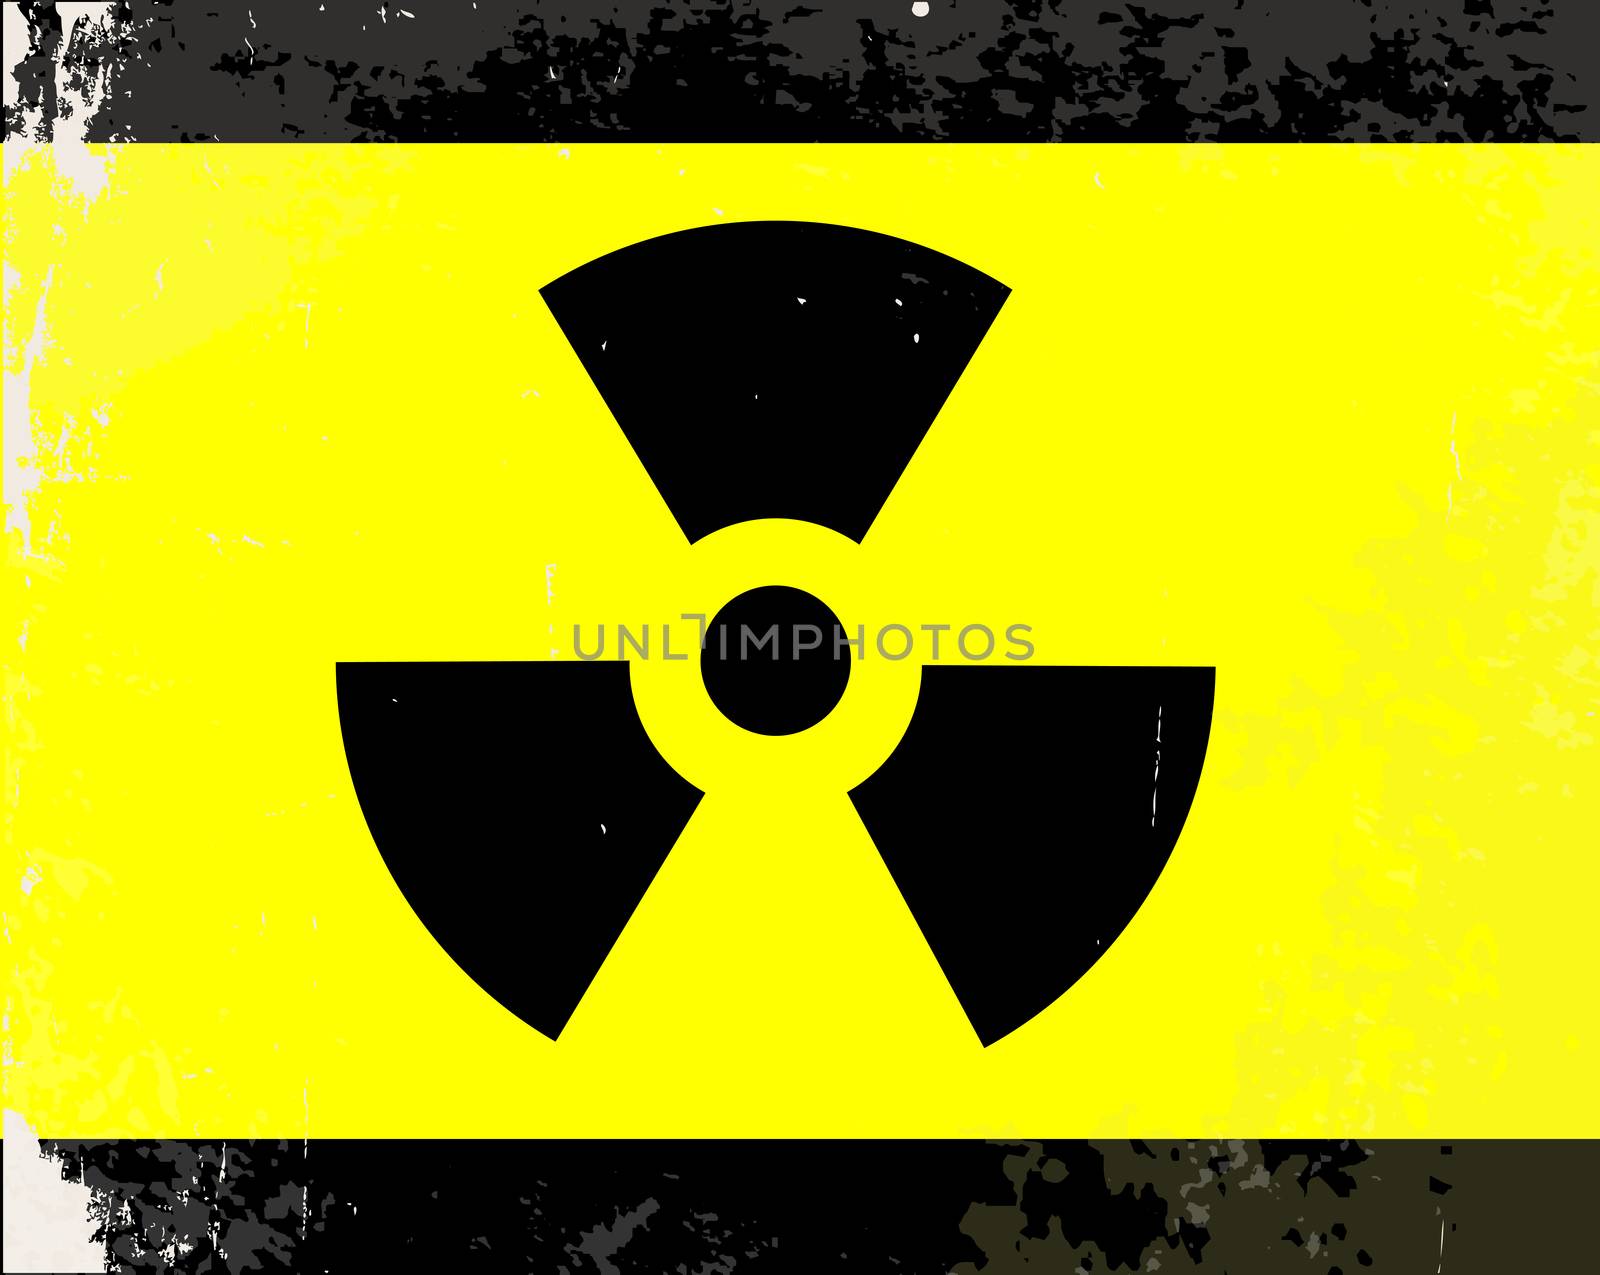 A worn Caution Radiation symbol in yellow and black